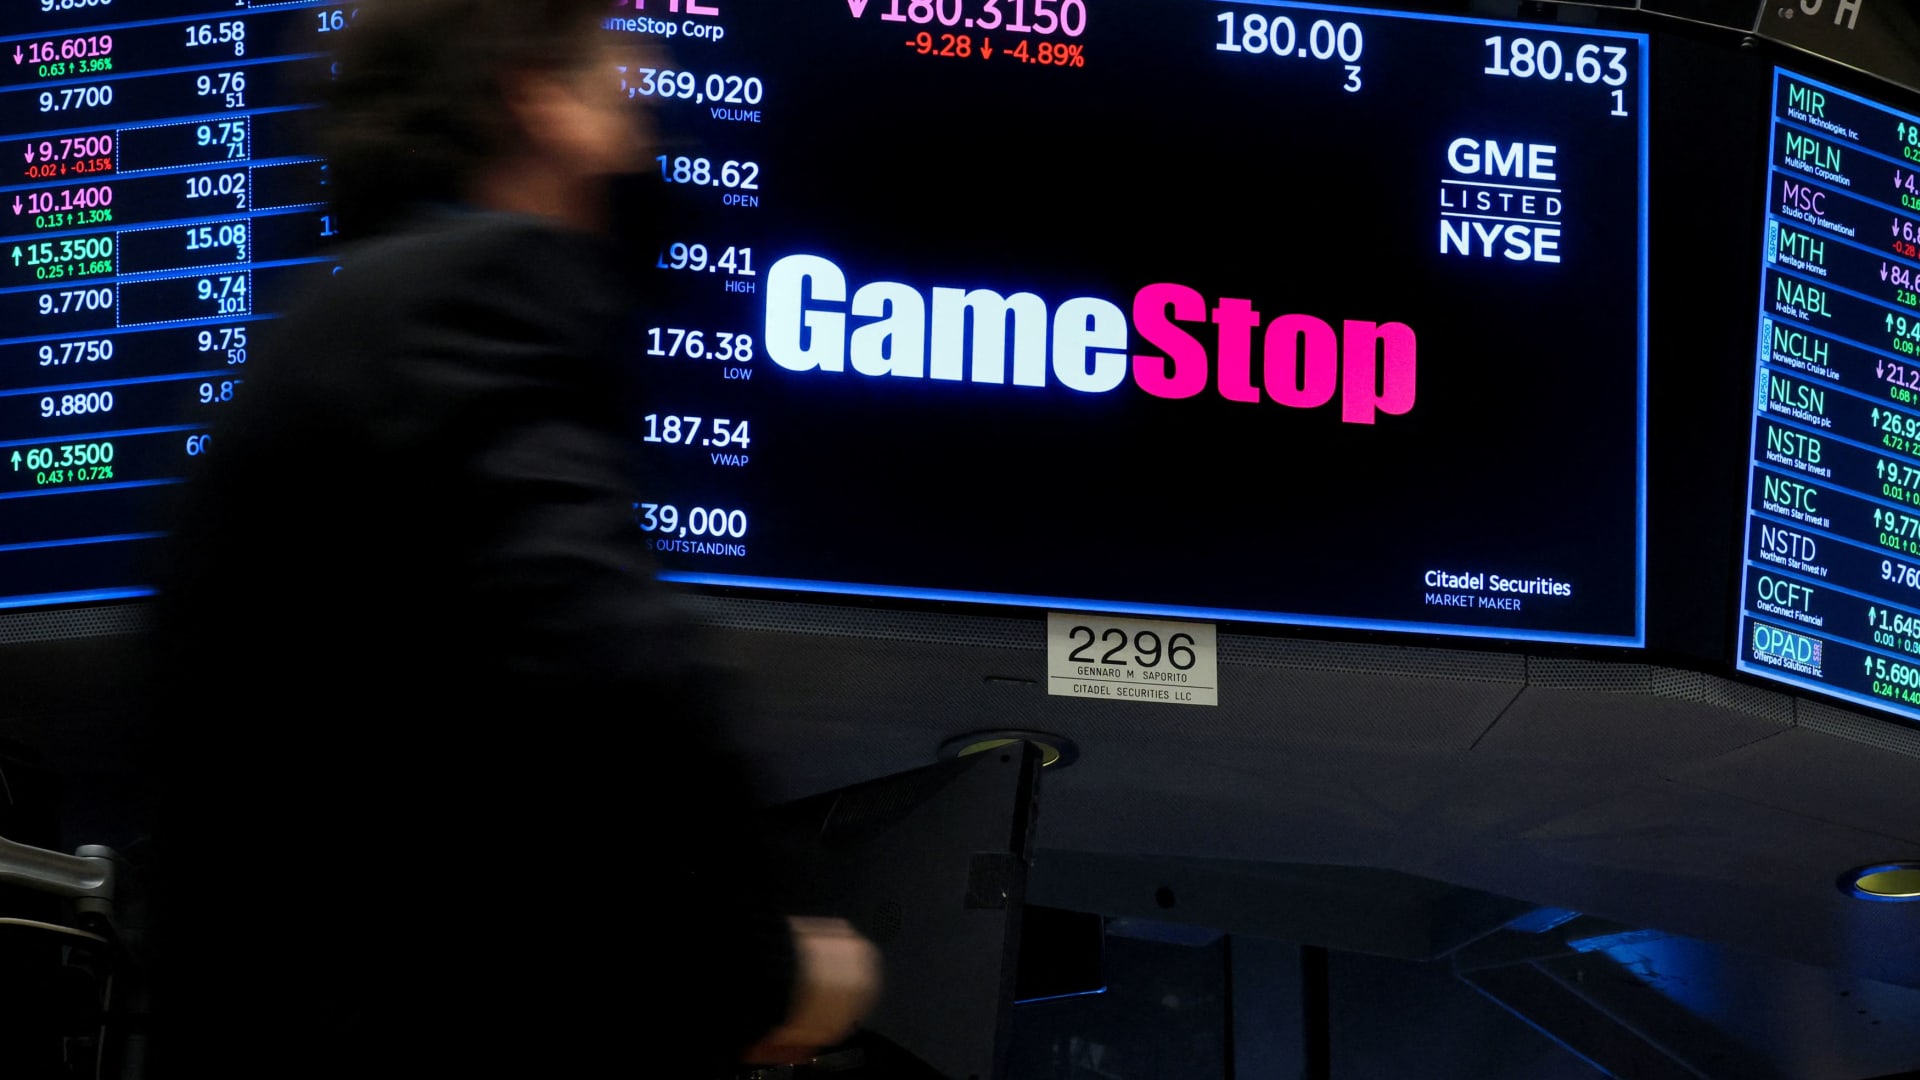 GameStop jumps 5% in extended trading after announcing 4-for-1 stock split